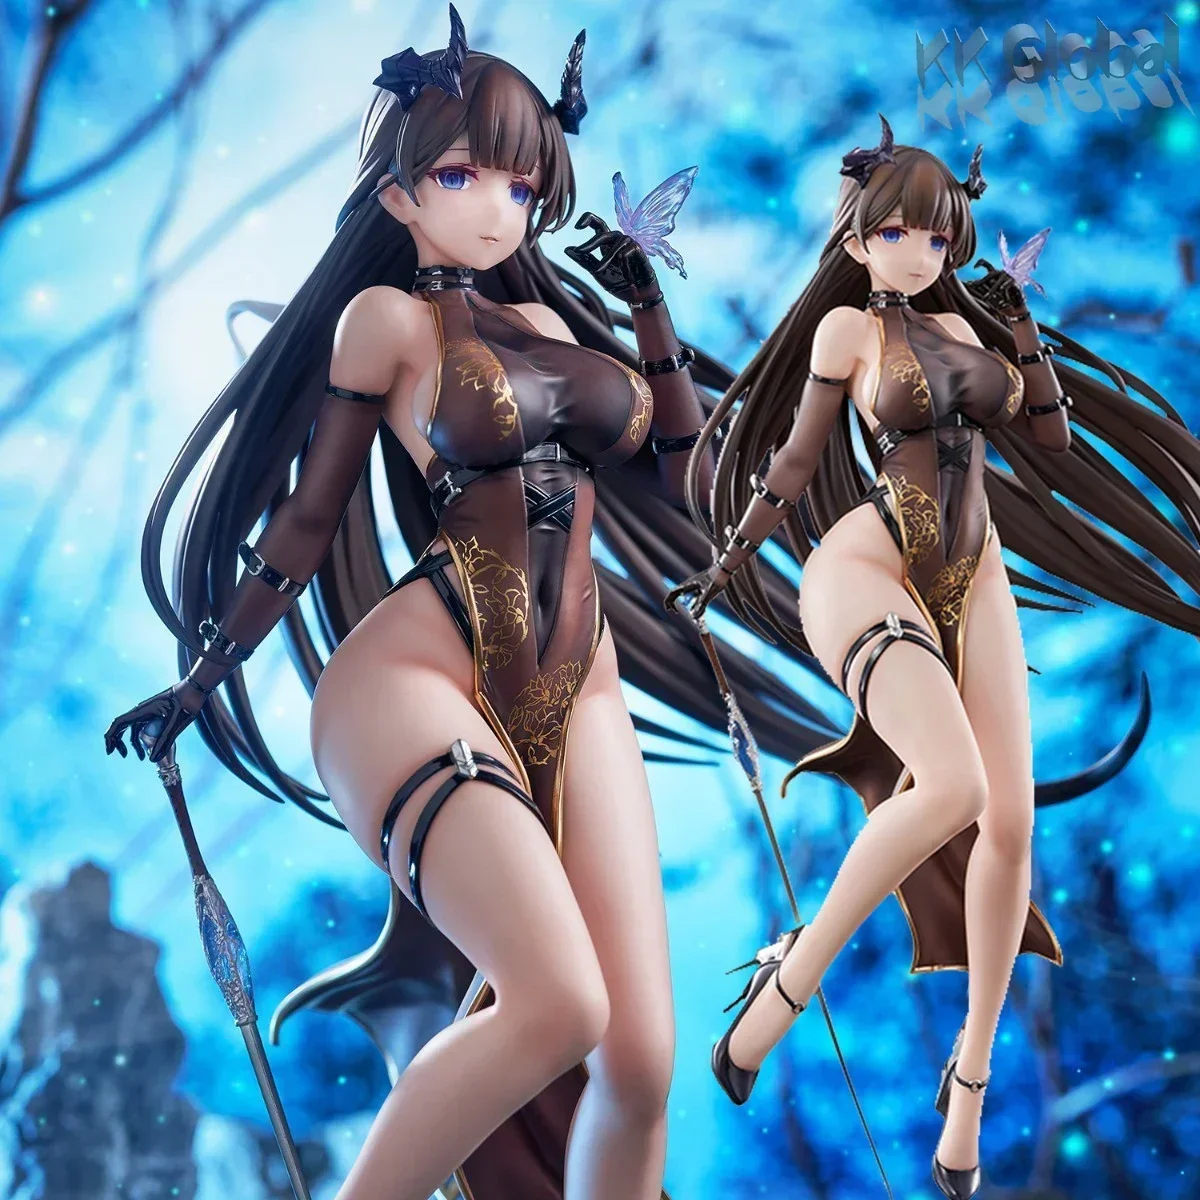 

25CM Hobby Sakura Lost Order Anime Figure MoYan Devil 1/7 Scale Beautiful Girl Action Figure PVCModel Collection Doll Gift Toys